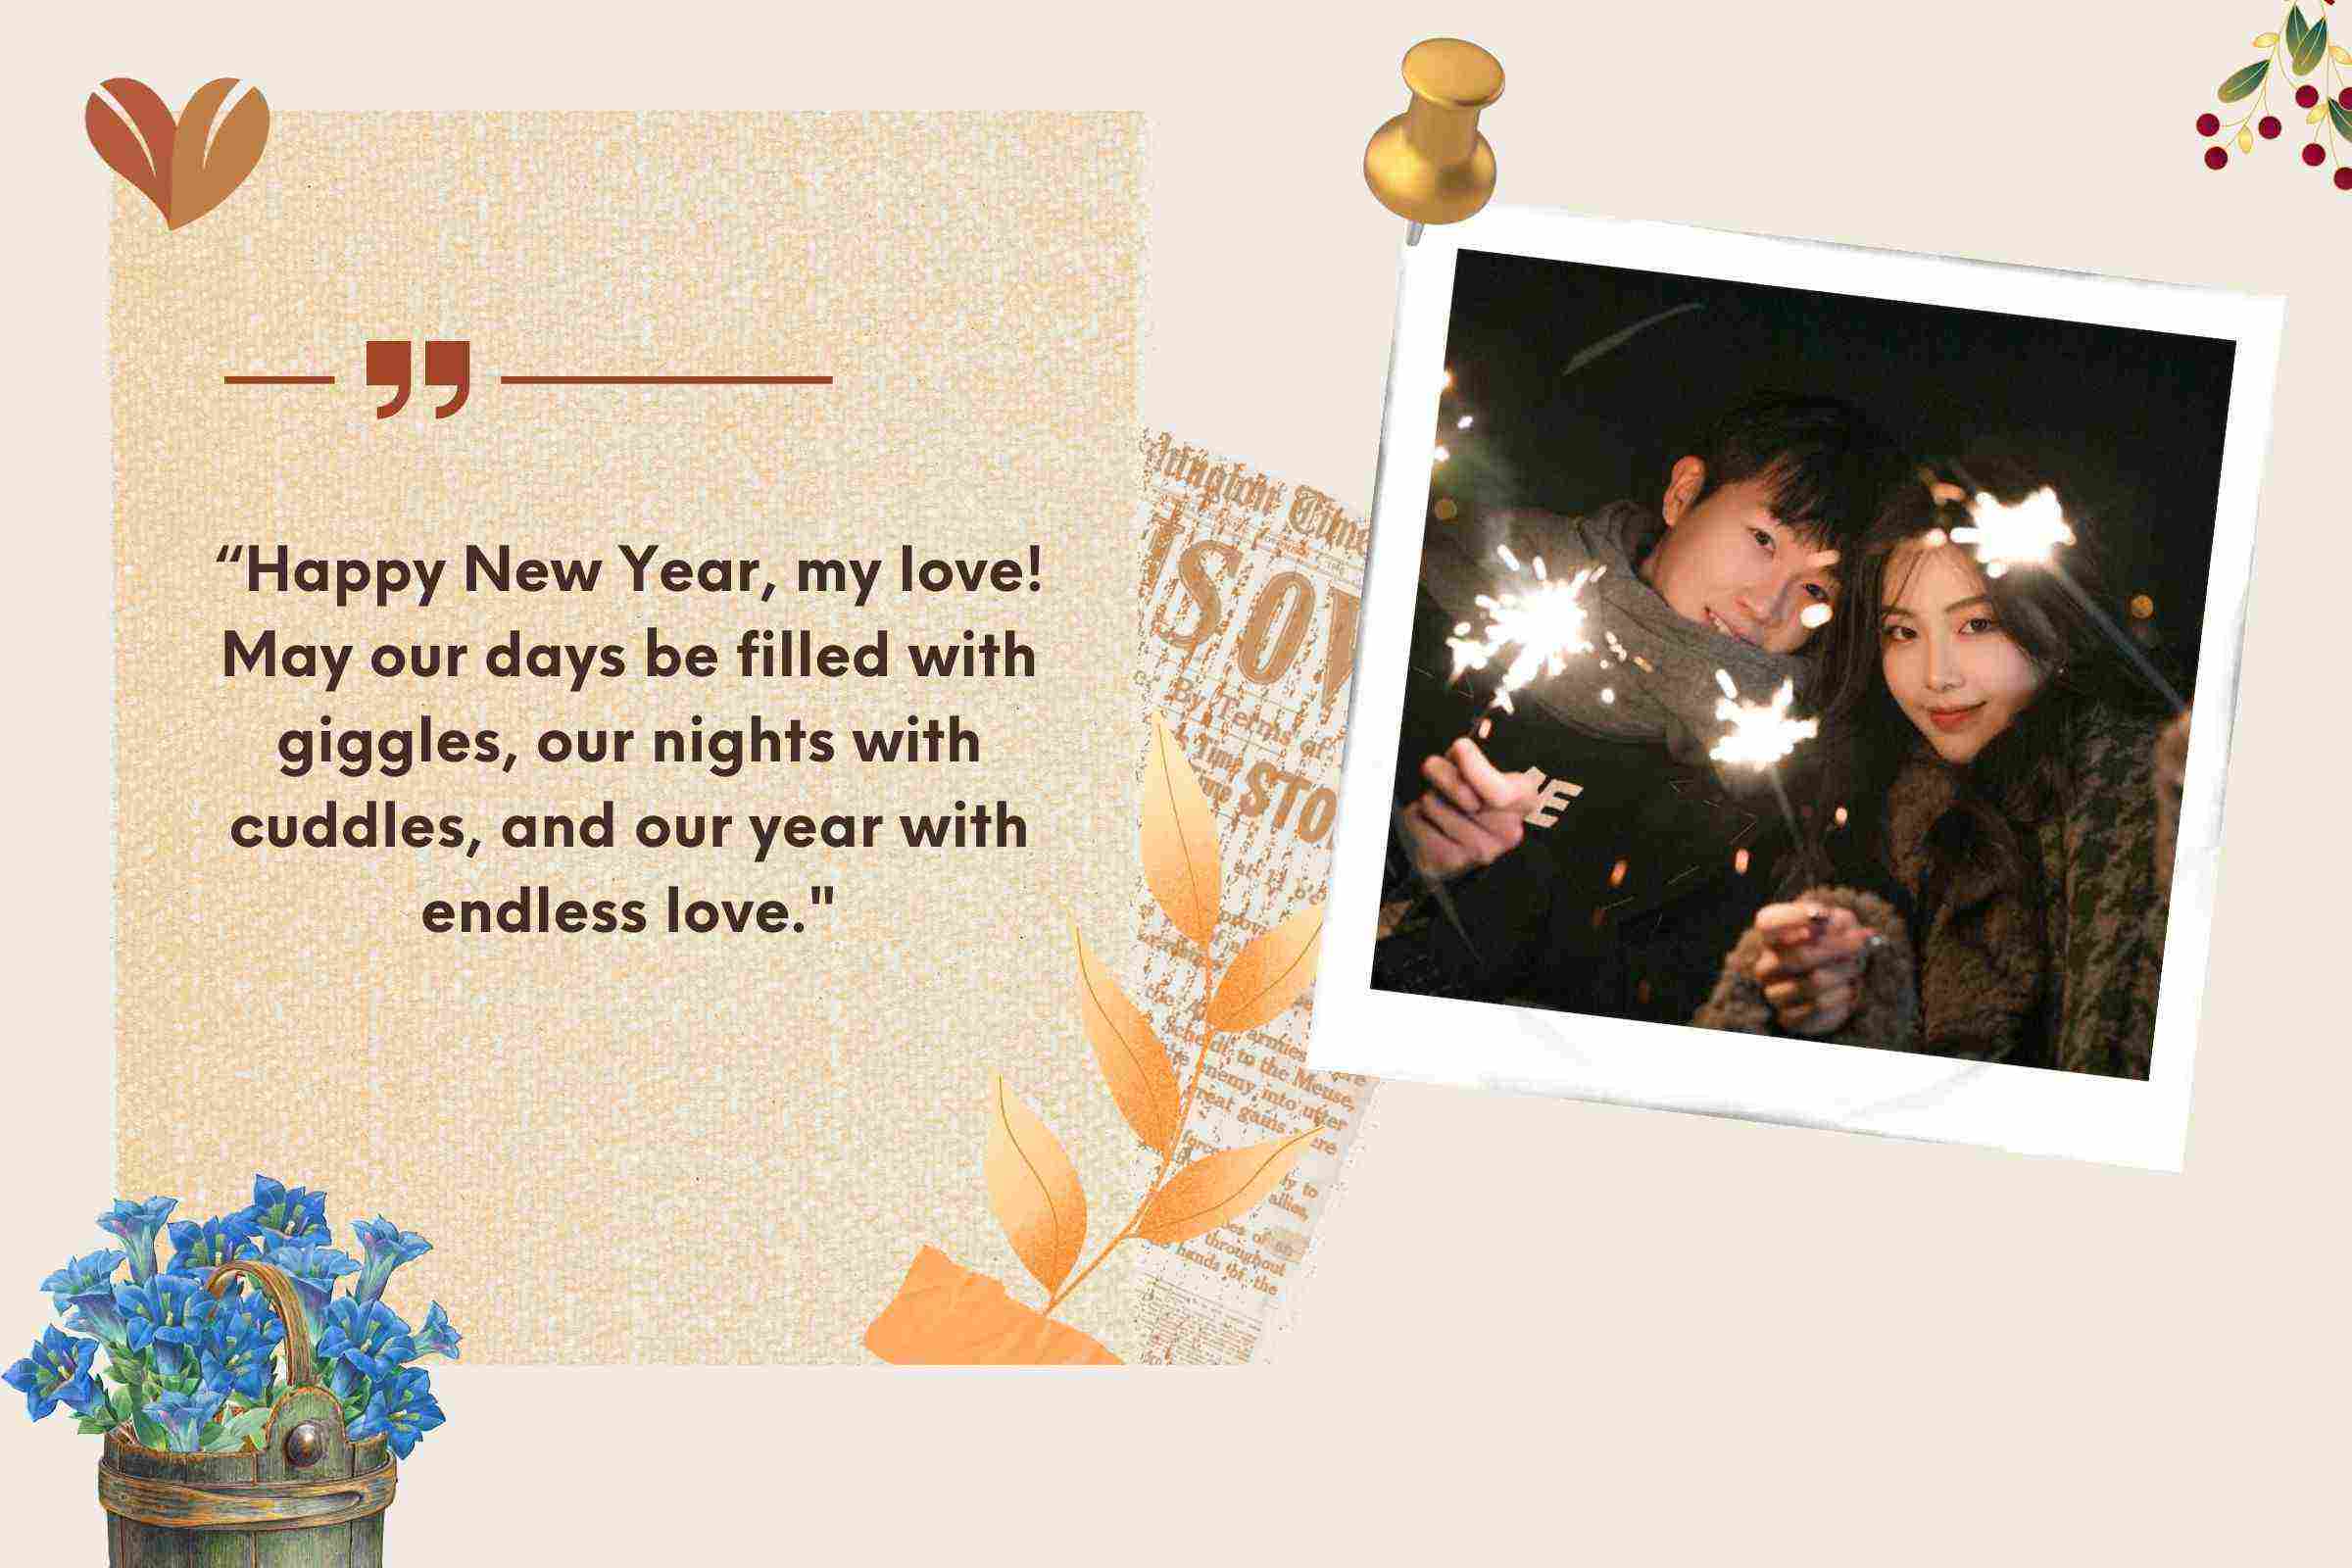 “Happy New Year, my love! May our days be filled with giggles, our nights with cuddles, and our year with endless love."